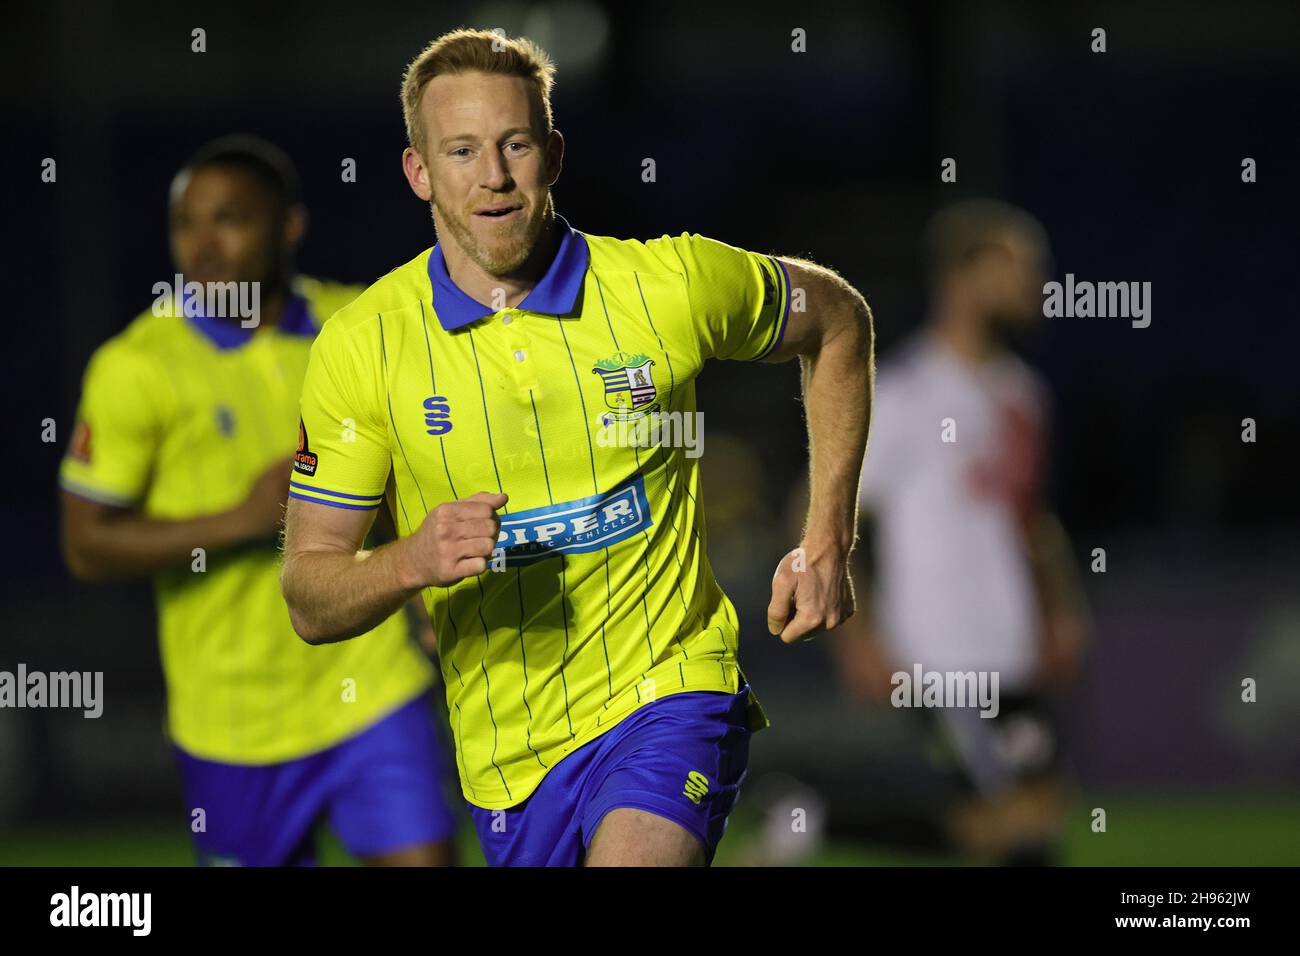 SOLIHULL, ENGLAND. DECEMBER 4TH 2021. Adam Rooney of Solihull Moors celebrates after scoring their teams second goal from the penalty spot during the Vanarama National League match between Solihull Moors and Woking FC at the Armco Stadium, Solihull on Saturday 4th December 2021. (Credit: James Holyoak/Alamy Live News) Stock Photo